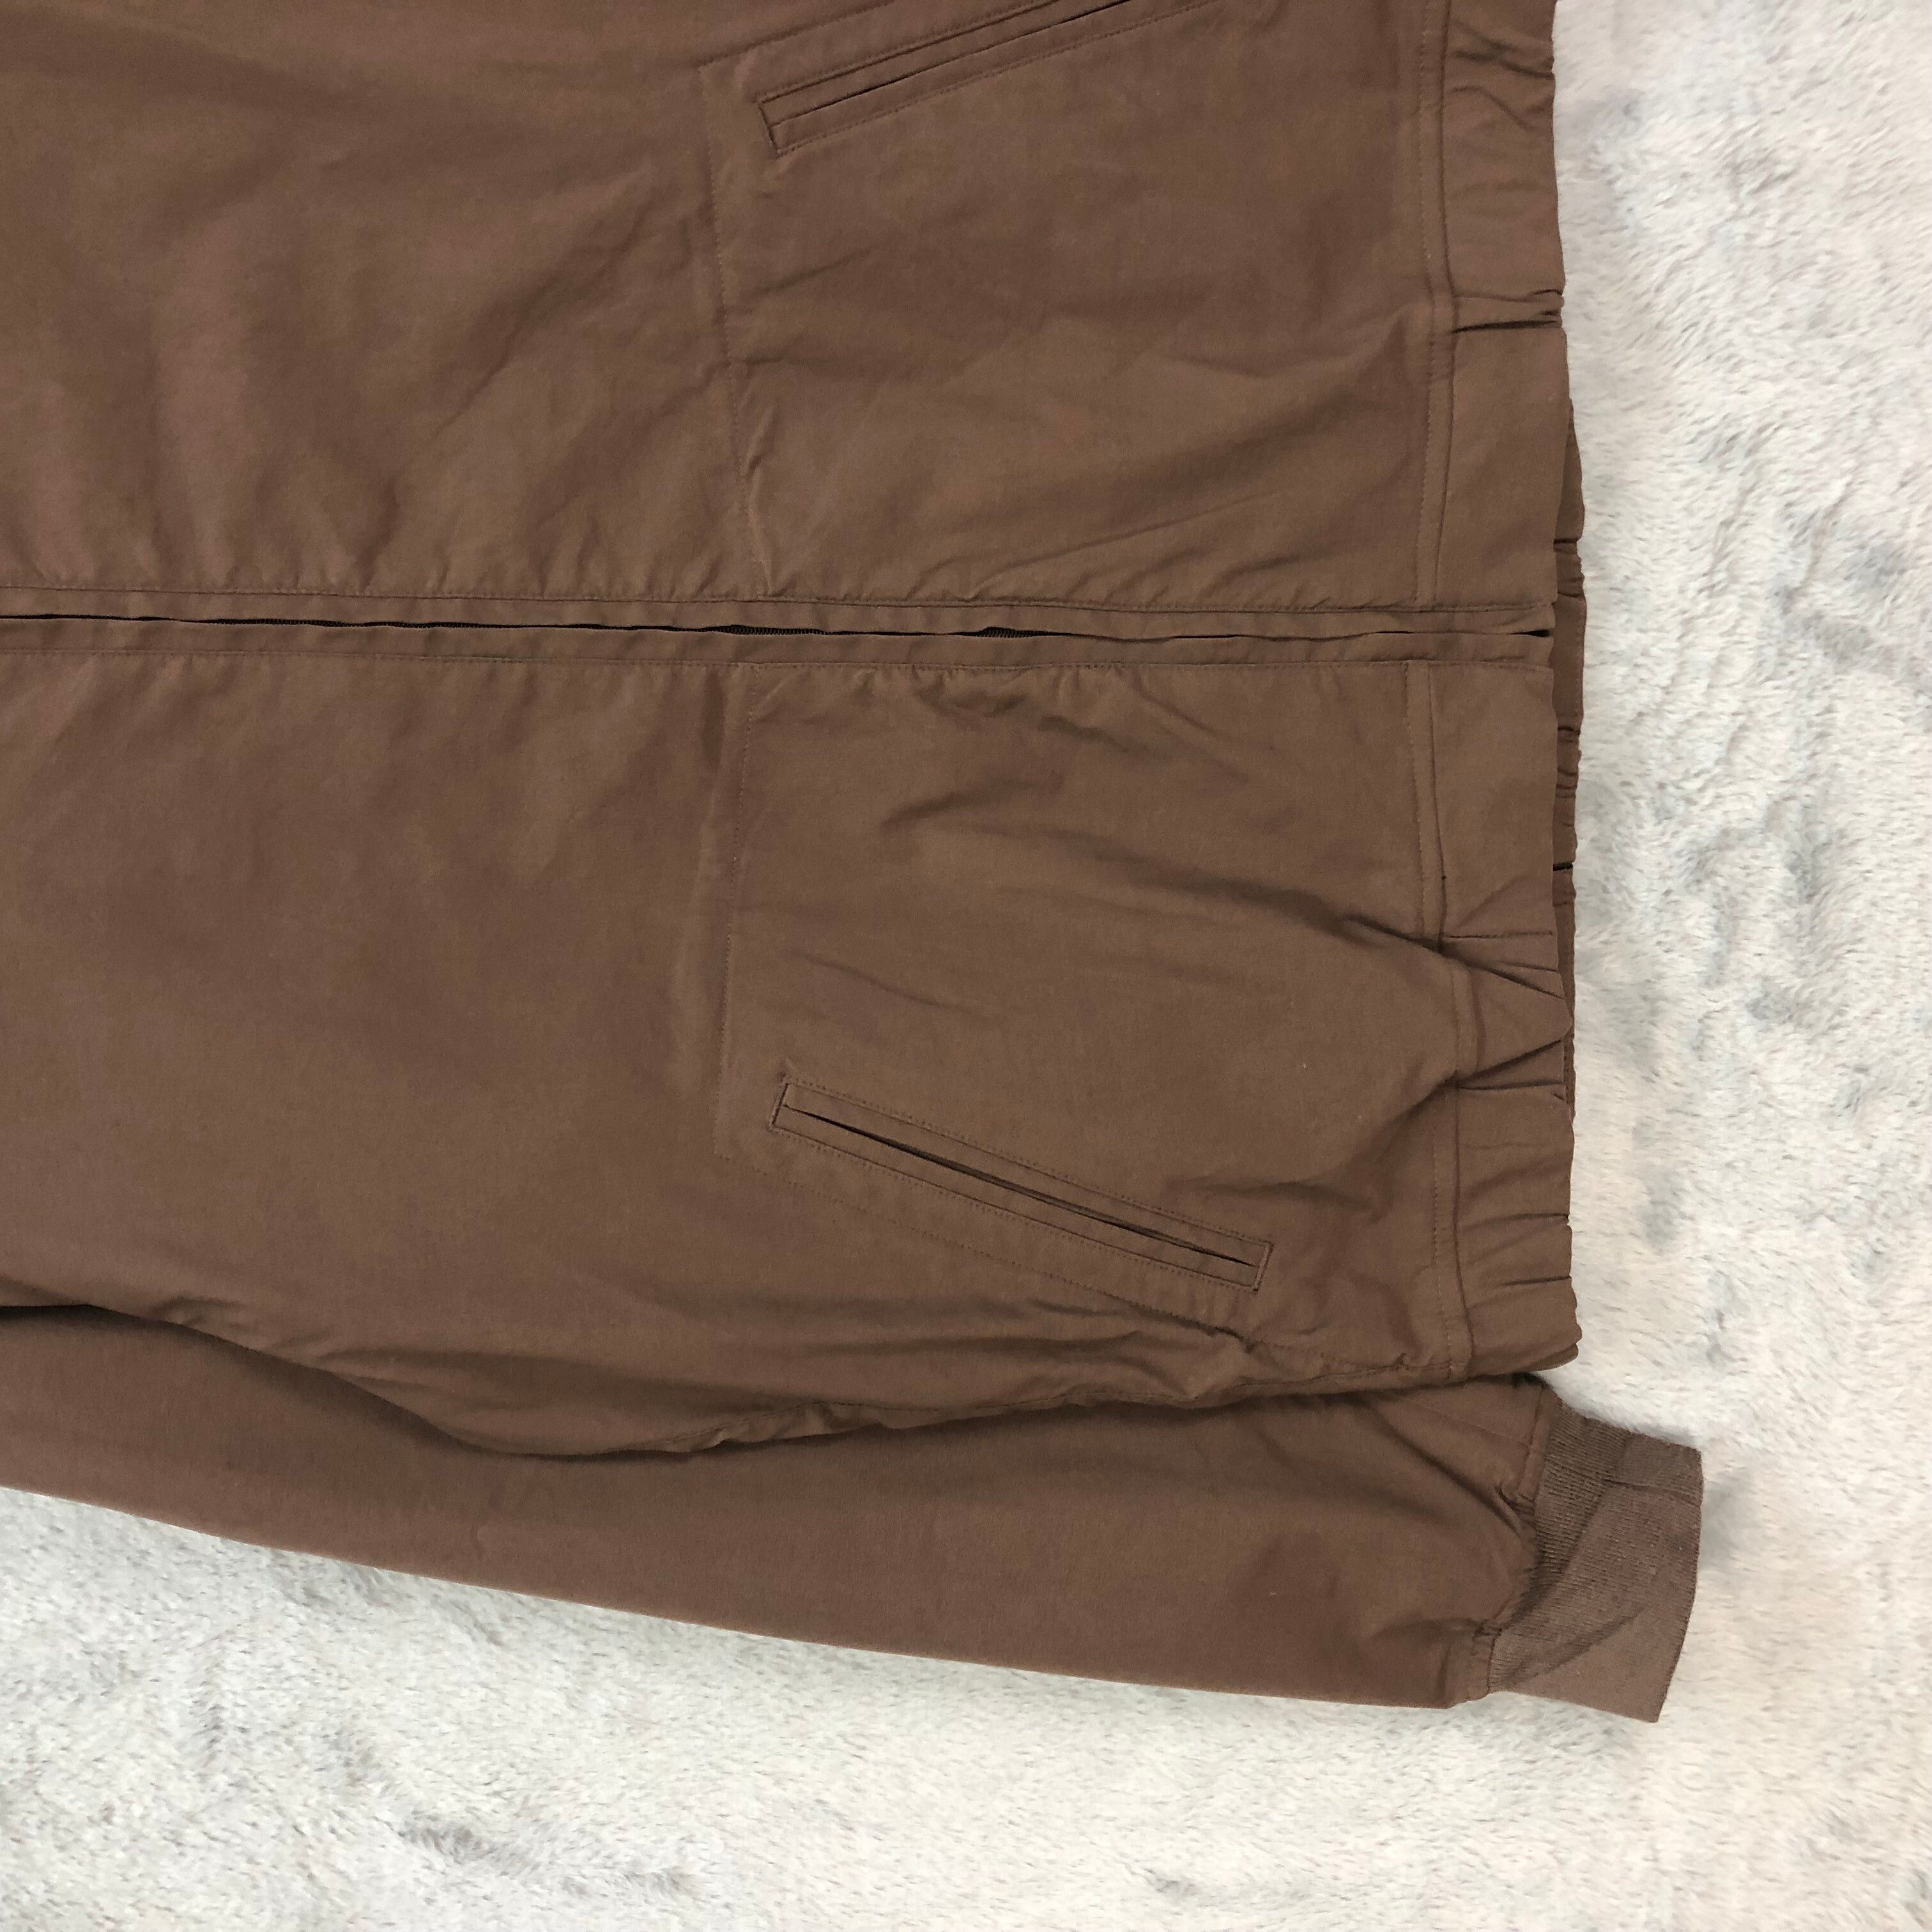 GREEN LABEL RELAXING United Arrows All Brown Bomber 5167-177 - 4